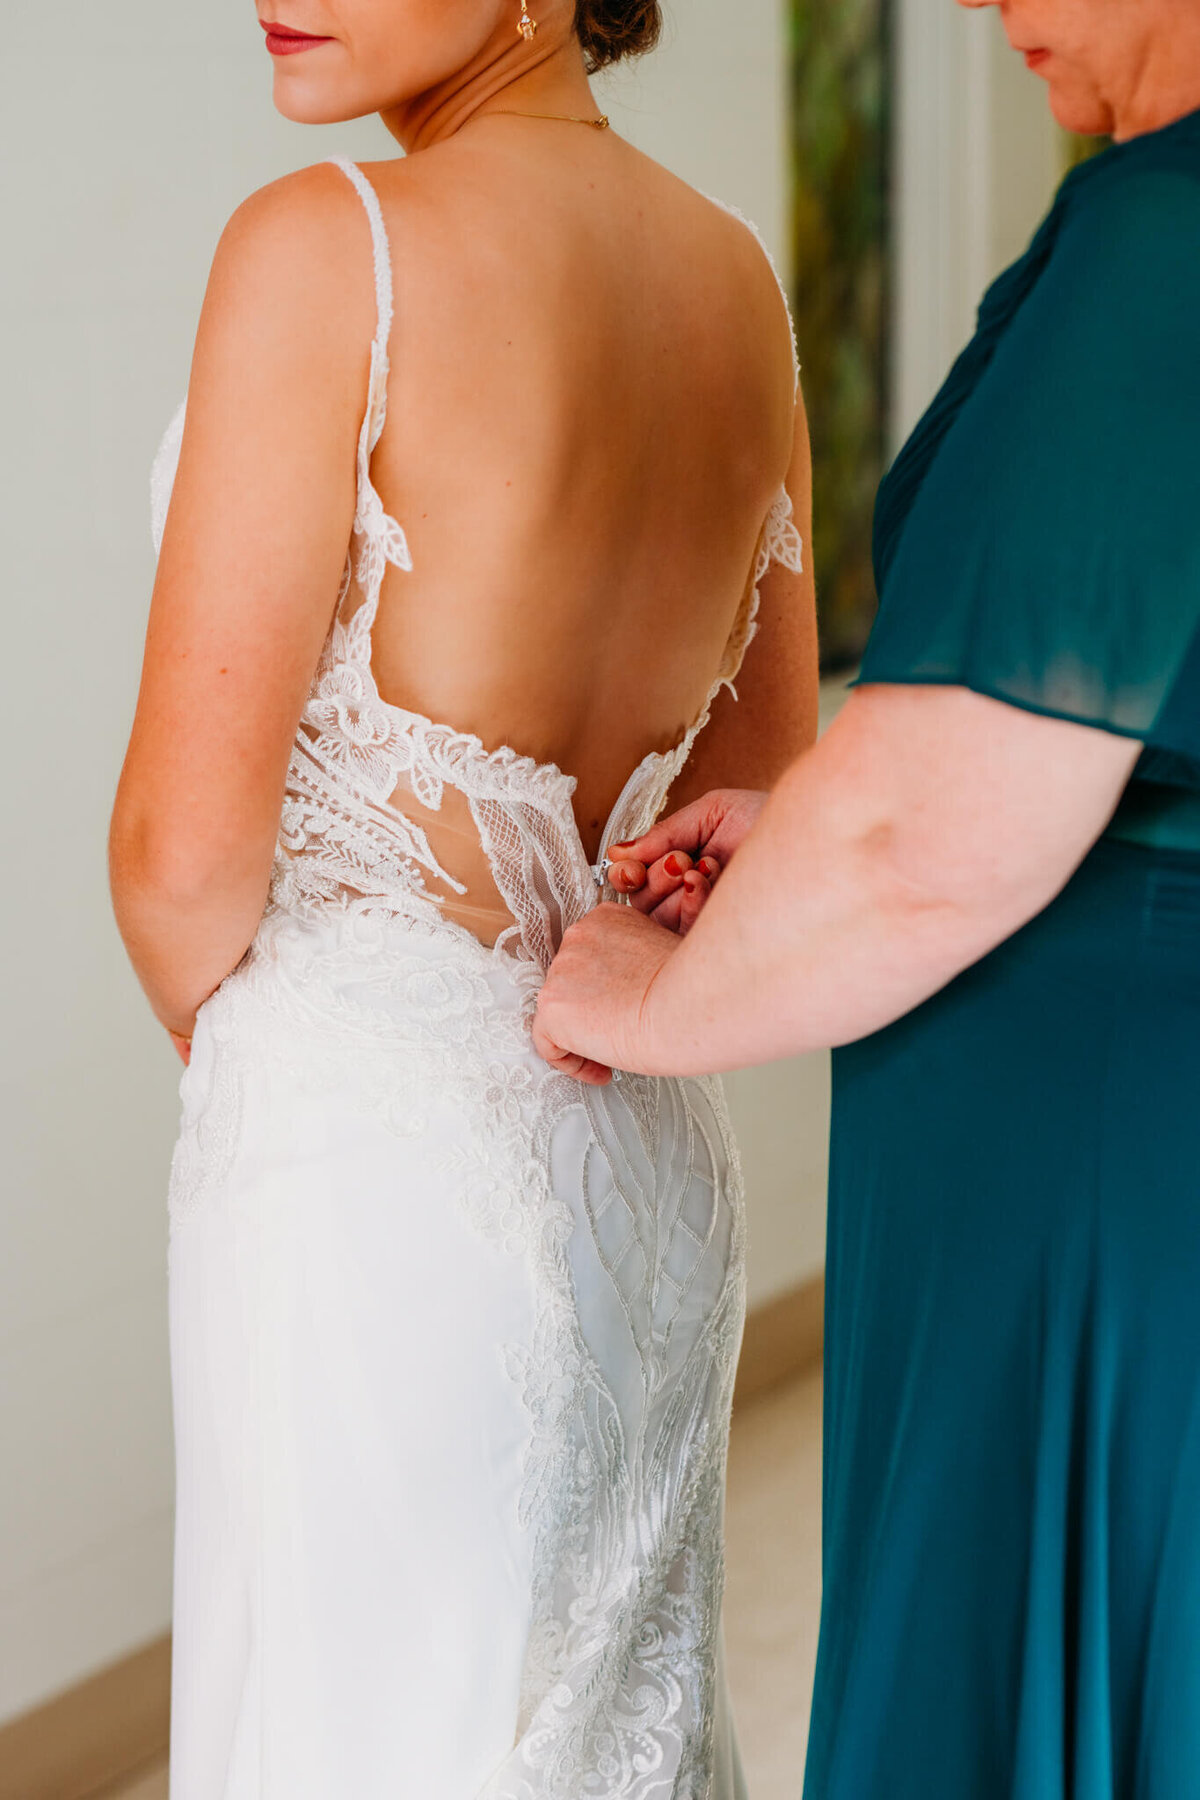 Photo of a brides wedding dress being zipped up by her mom who is wearing a teal dress